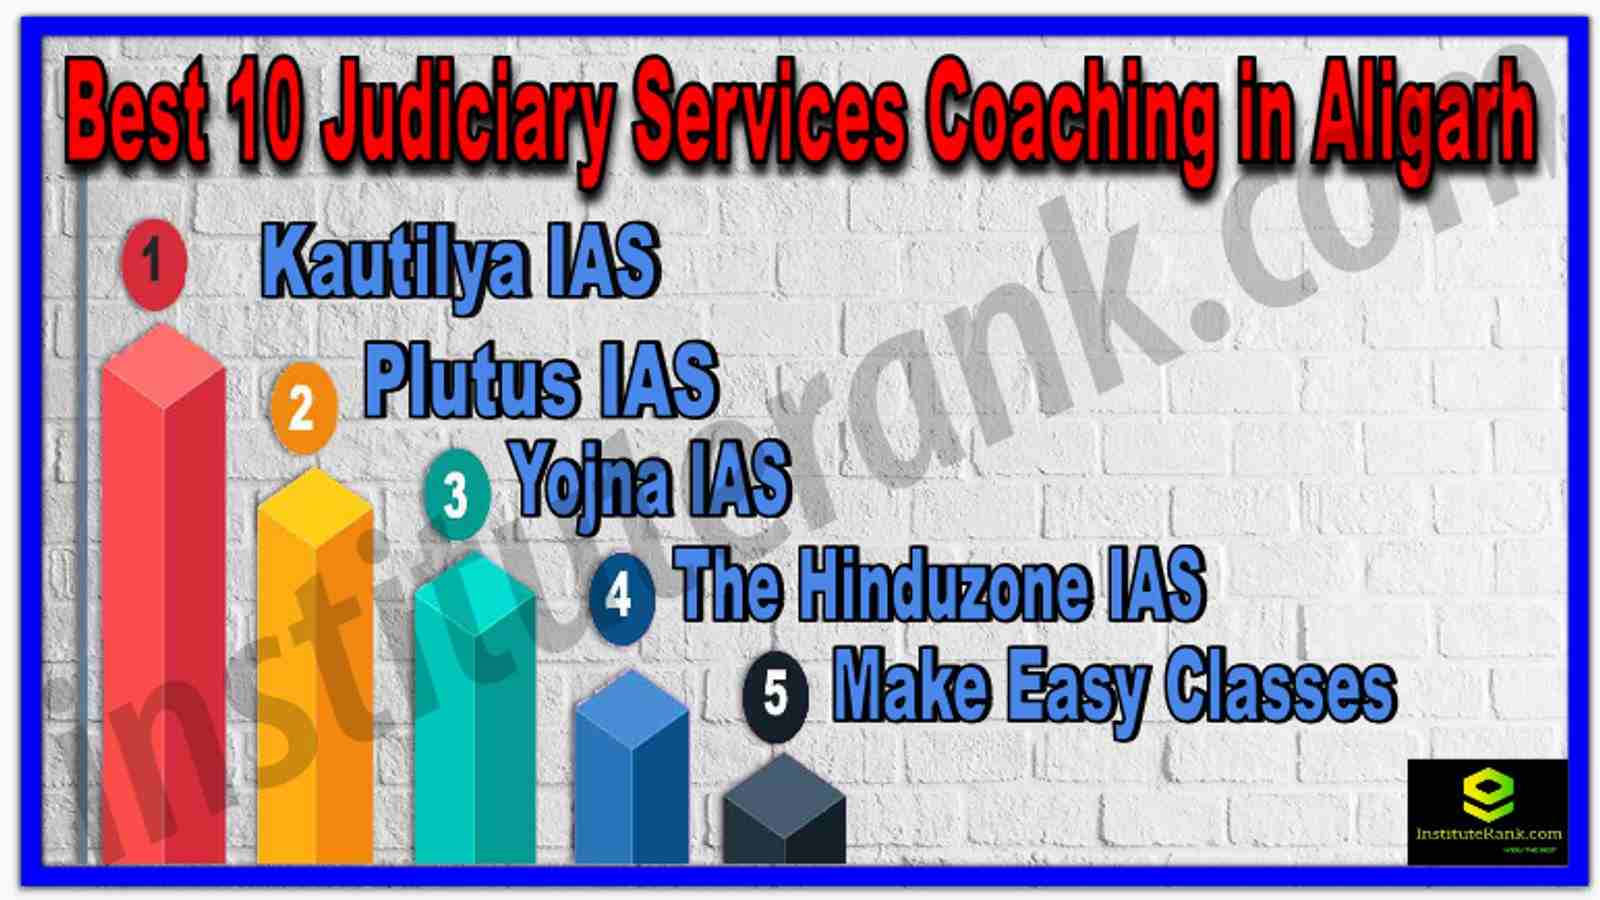 Best 10 Judiciary Services Coaching in Aligarh